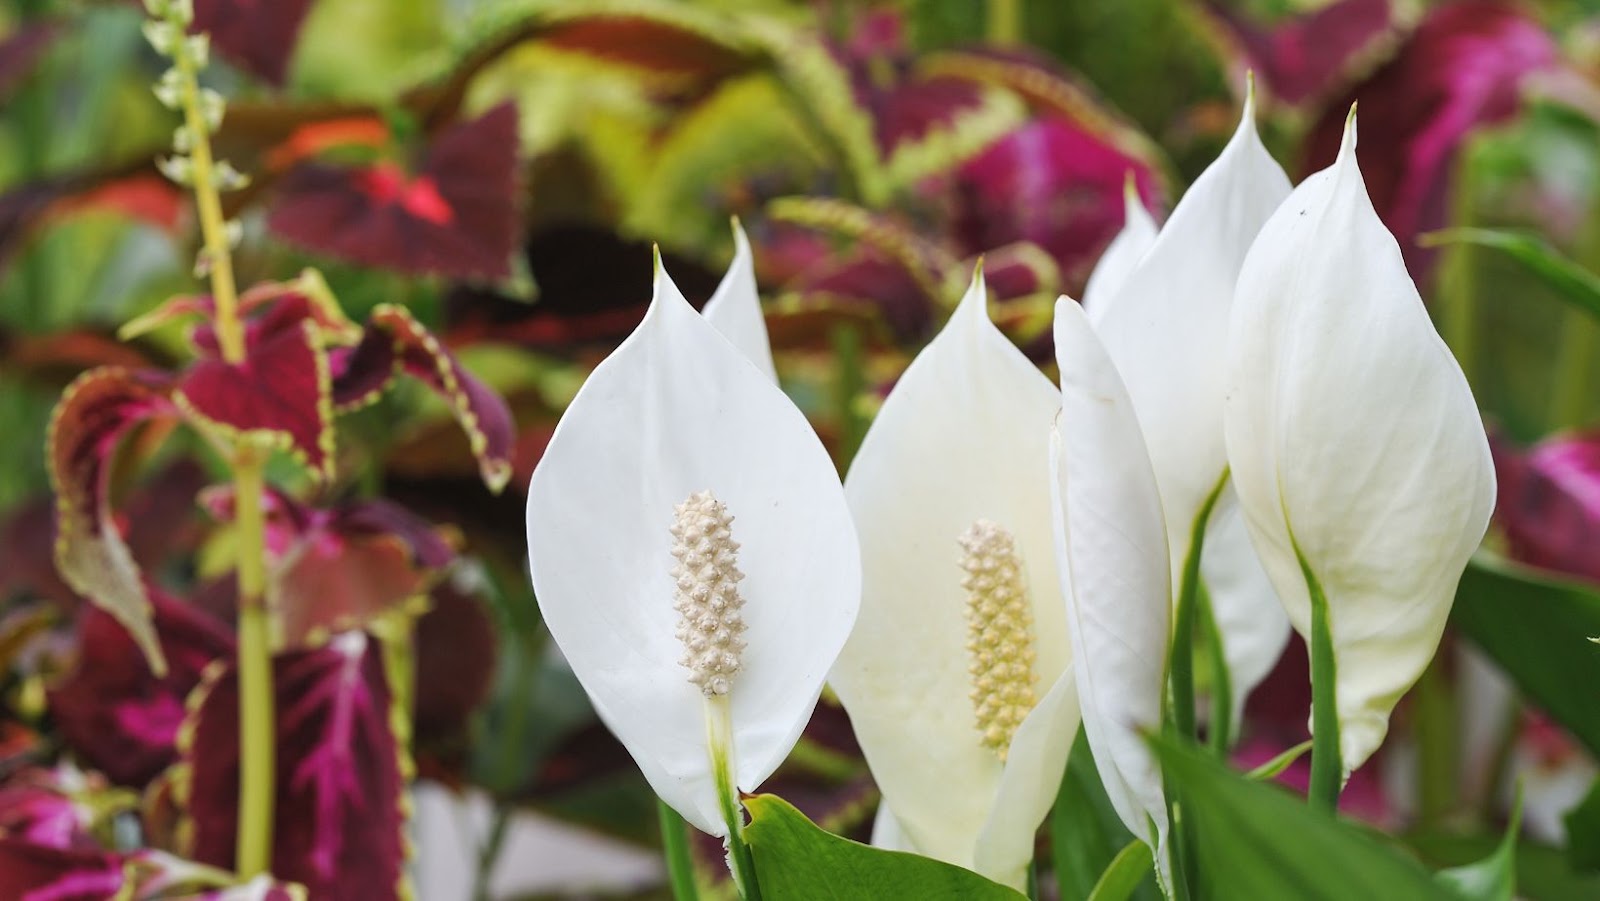 The Symptoms of Peace Lily Poisoning in Humans